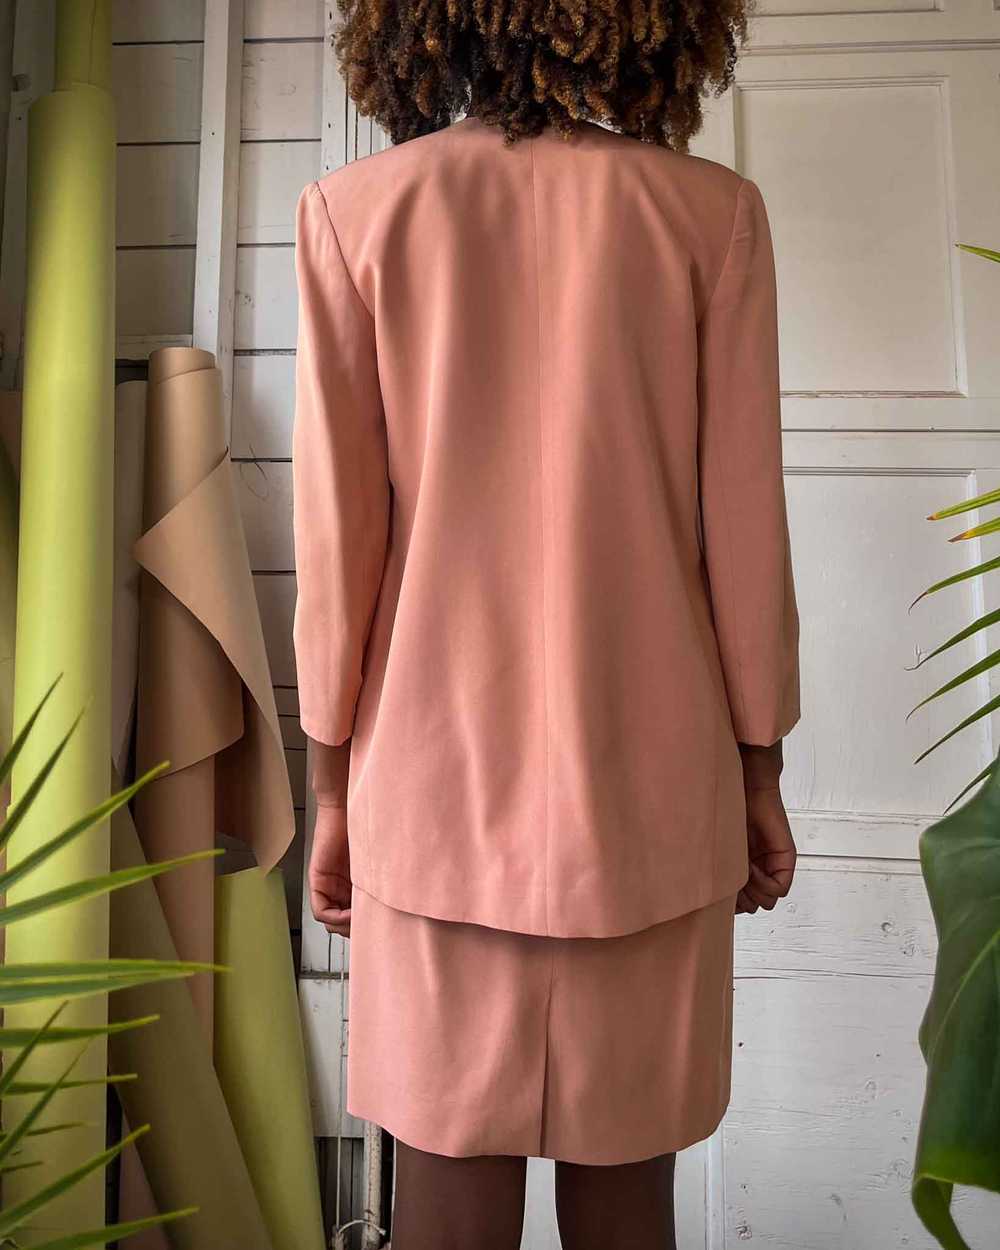 90s Pink Silk Skirt Suit - image 6